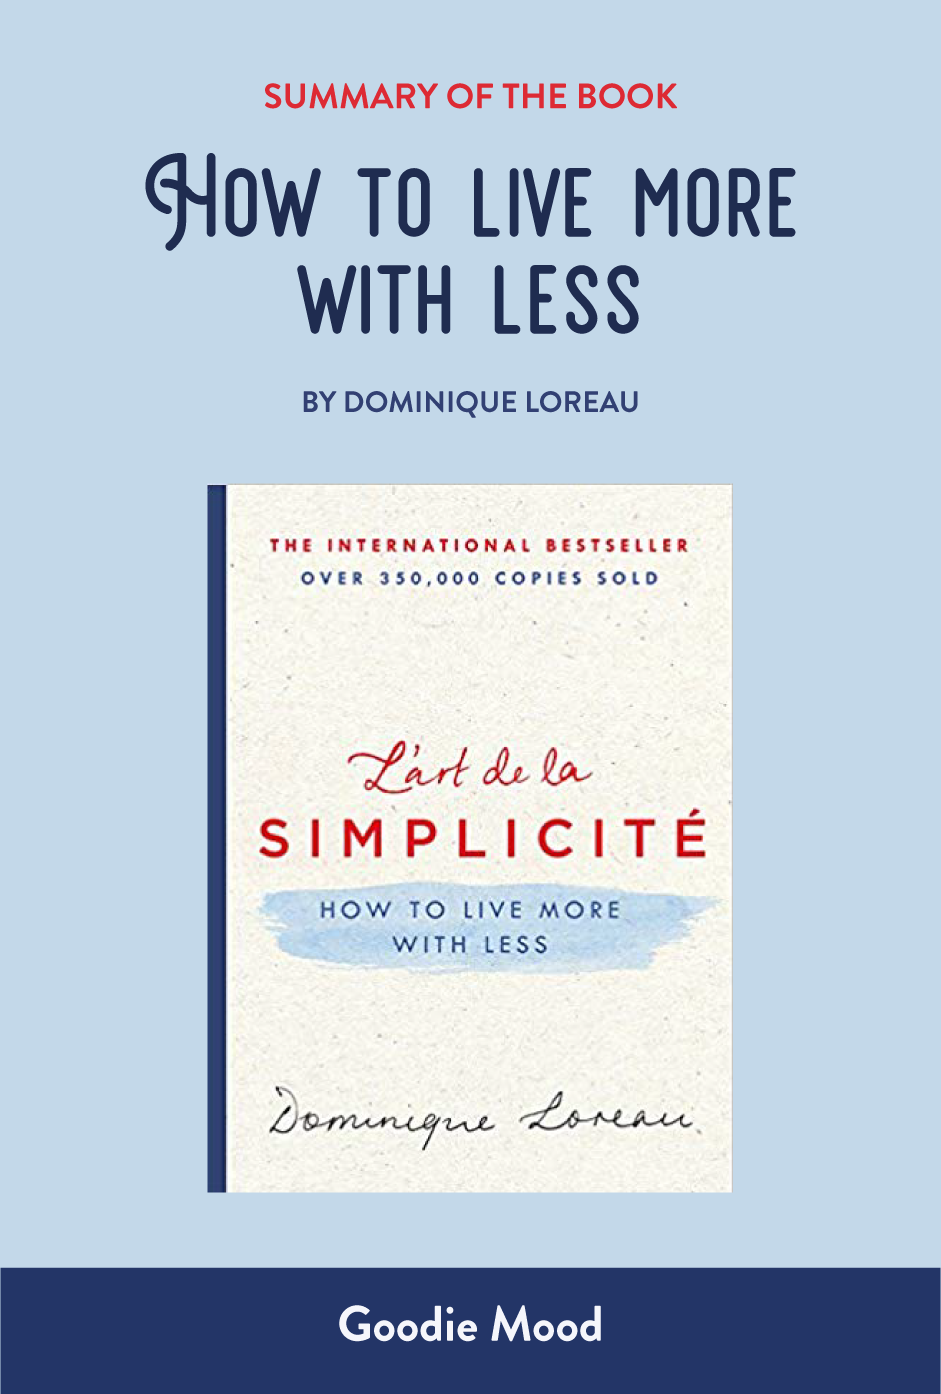 Summary of the book "How to live more with less" by Dominique Loreau - infographics